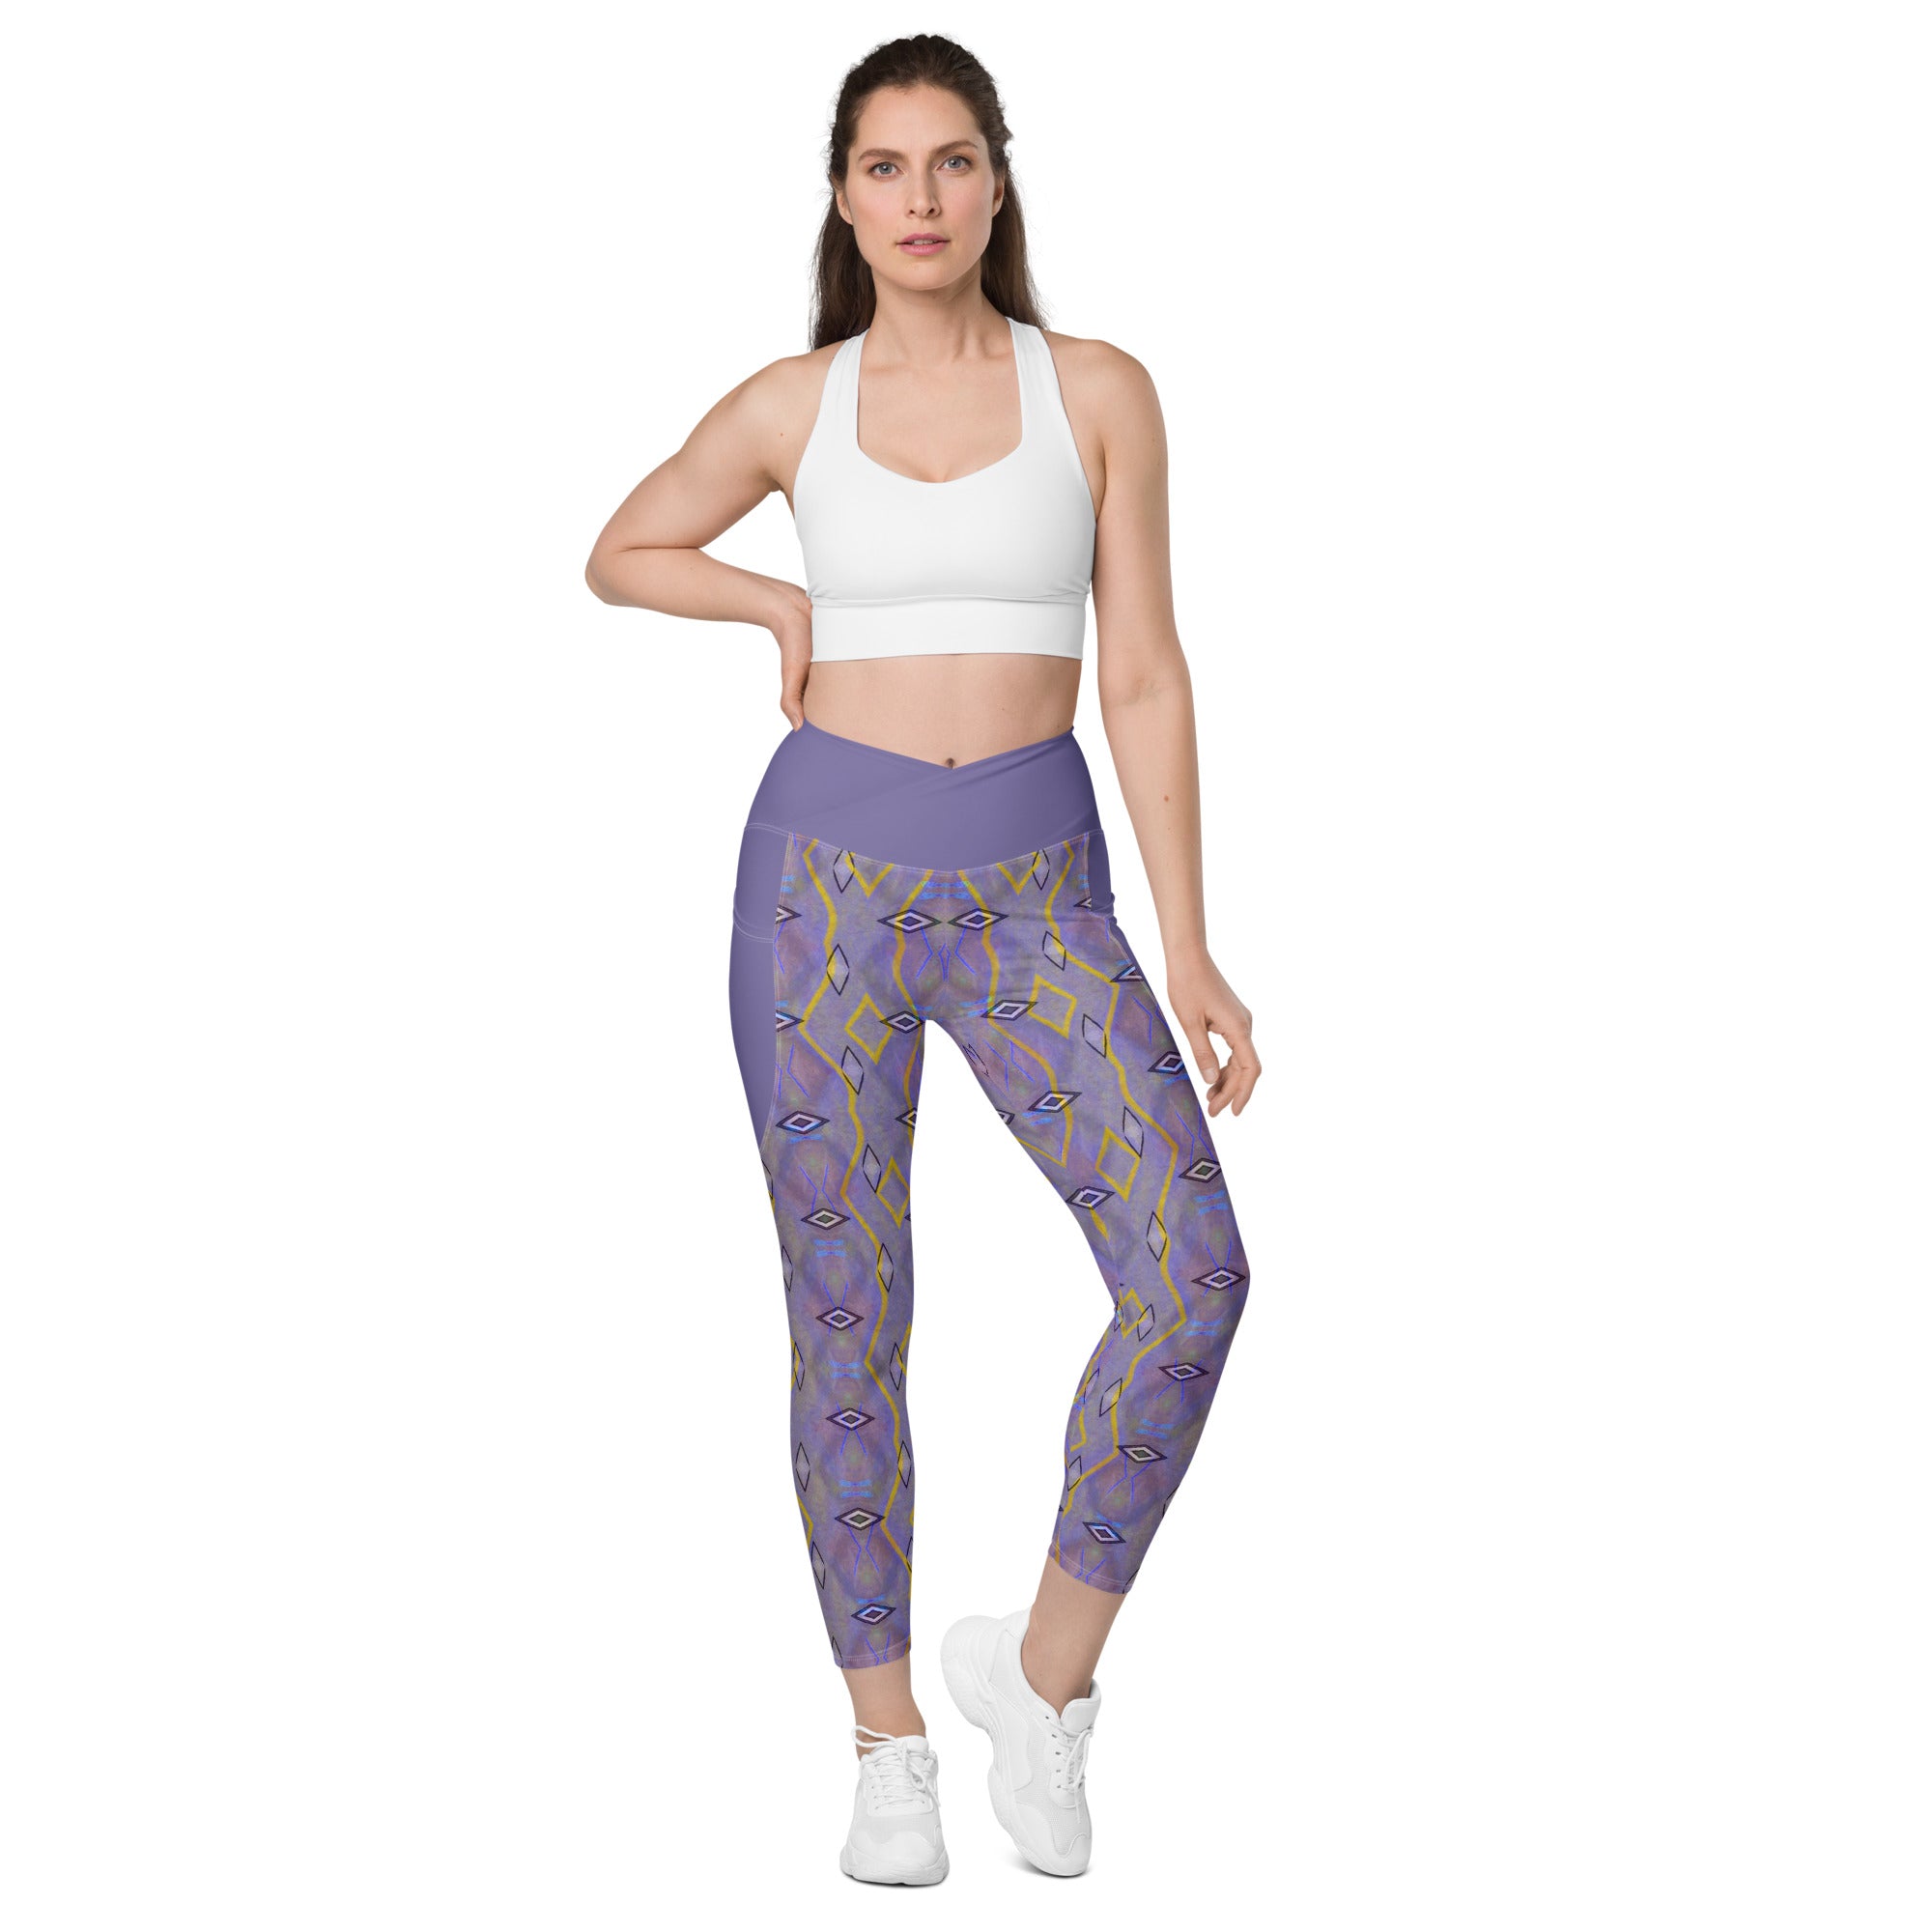 Urban style meets cosmic vibes with Cosmic Fusion Tristar Crossover Leggings.